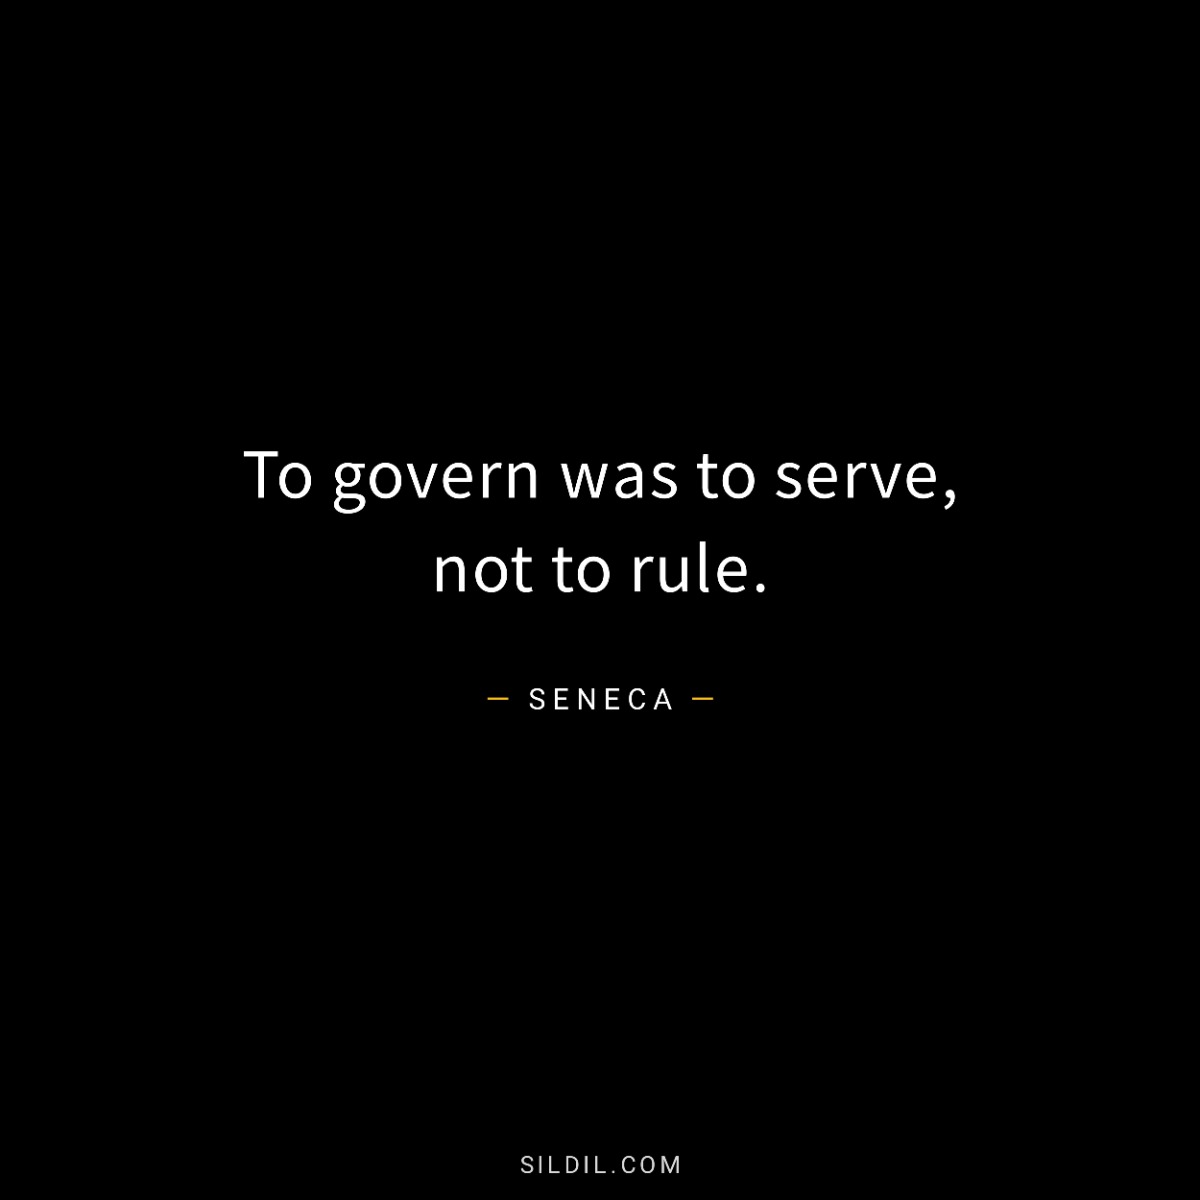 To govern was to serve, not to rule.